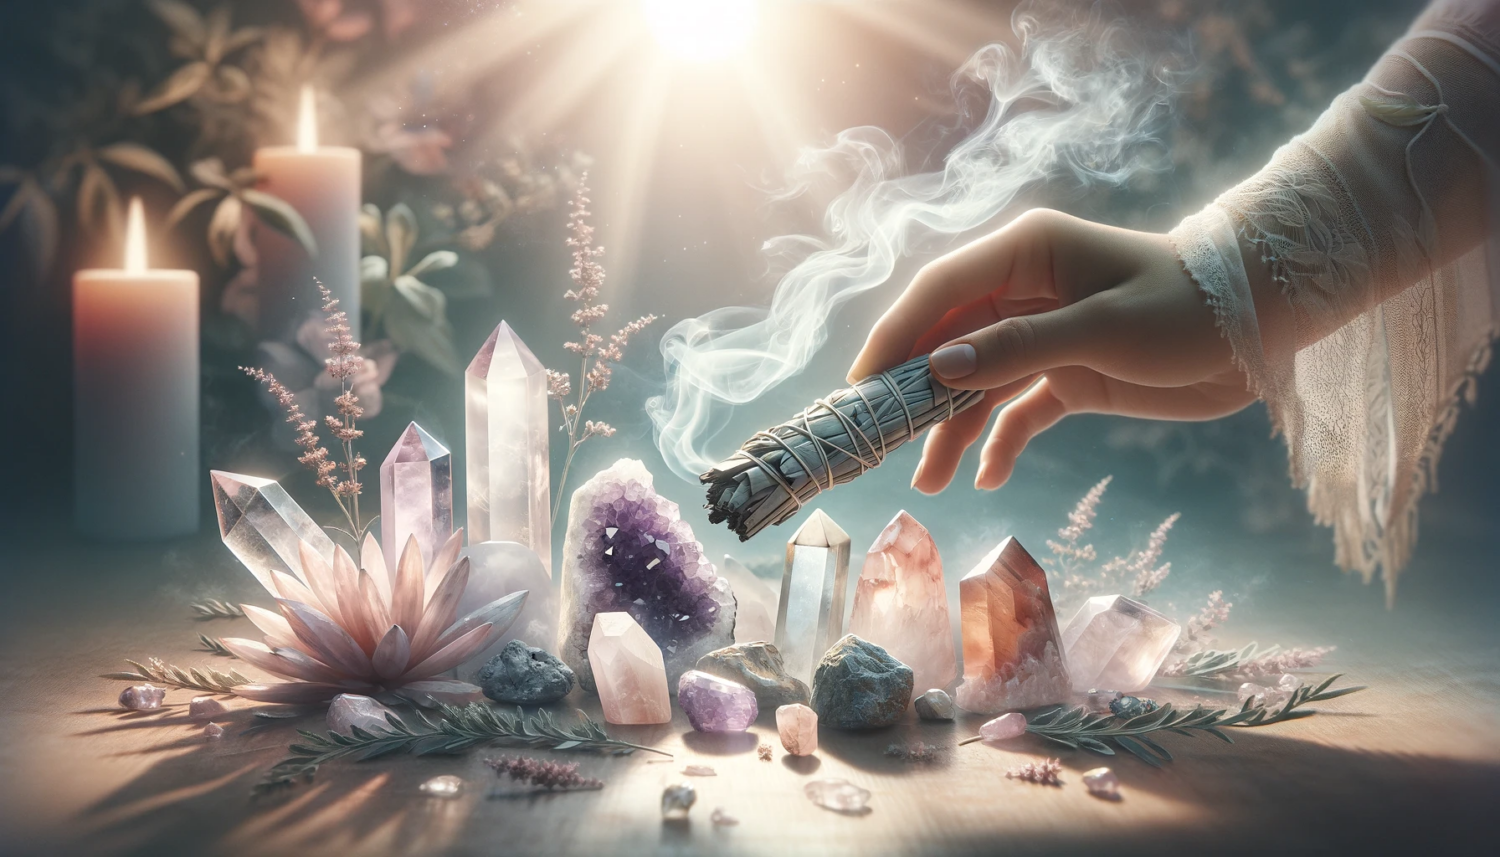 A serene and mystical scene showing a smudging ritual with various crystals in a metaphysical setting. The image features crystals such as clear quartz, amethyst, and rose quartz, arranged with elegance. A hand is visible, holding a smudge stick made of sage, with soft smoke gracefully encircling the crystals, creating a purifying aura. The background is filled with a soft, ambient light, contributing to the tranquil and otherworldly atmosphere. The composition is rendered in soft pastels and light tones, emphasizing the mystical and calming essence of the ritual, perfectly suited for a 16:9 aspect ratio.